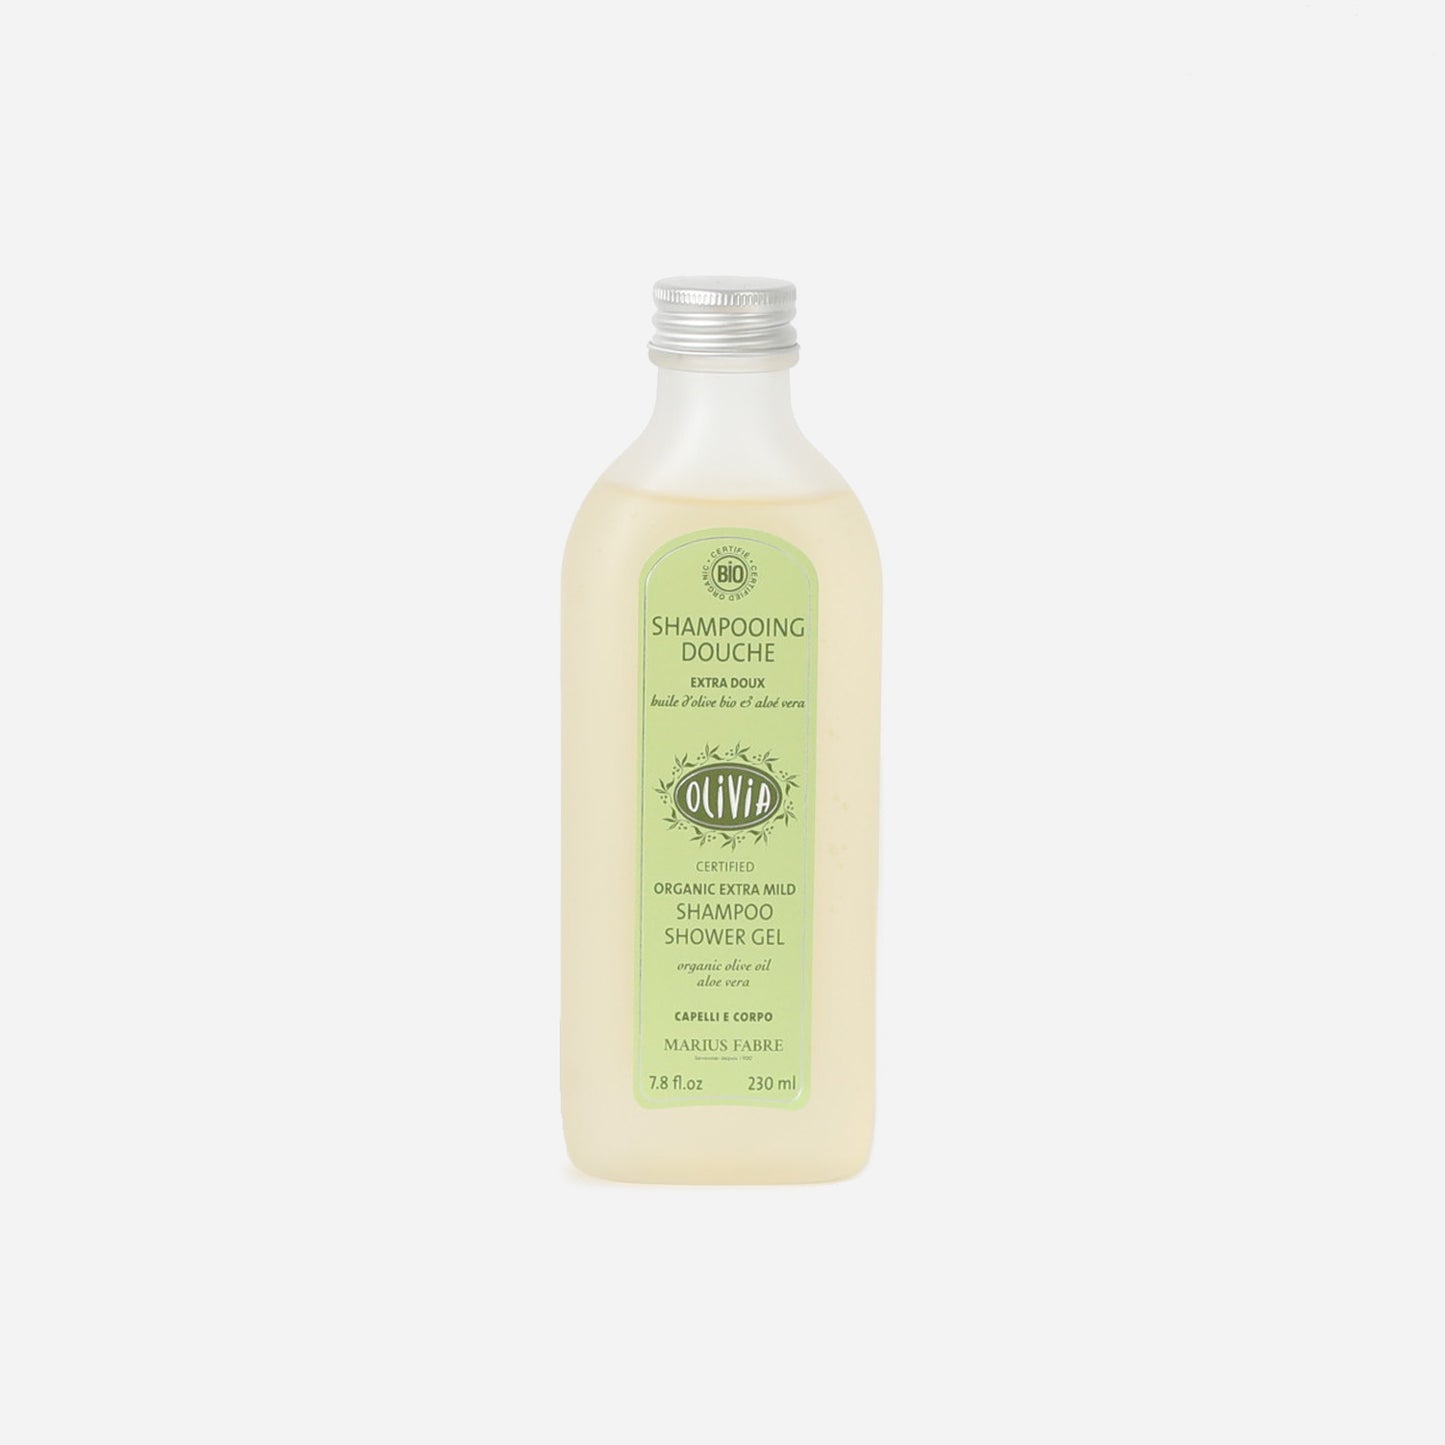 Shower shampoo with olive oil and aloe vera, certified organic, 230 ml